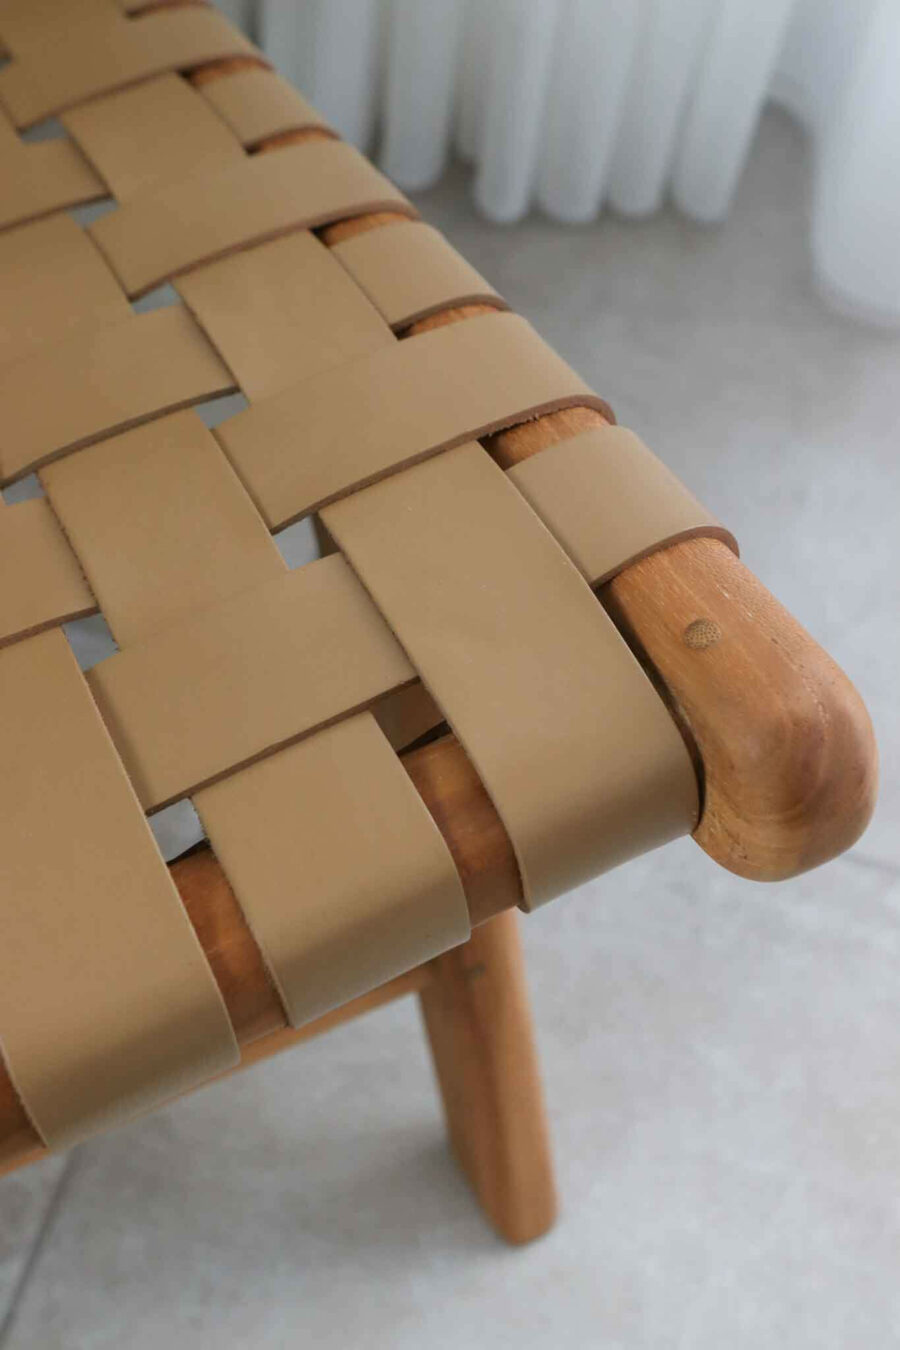 pia armchair in natural